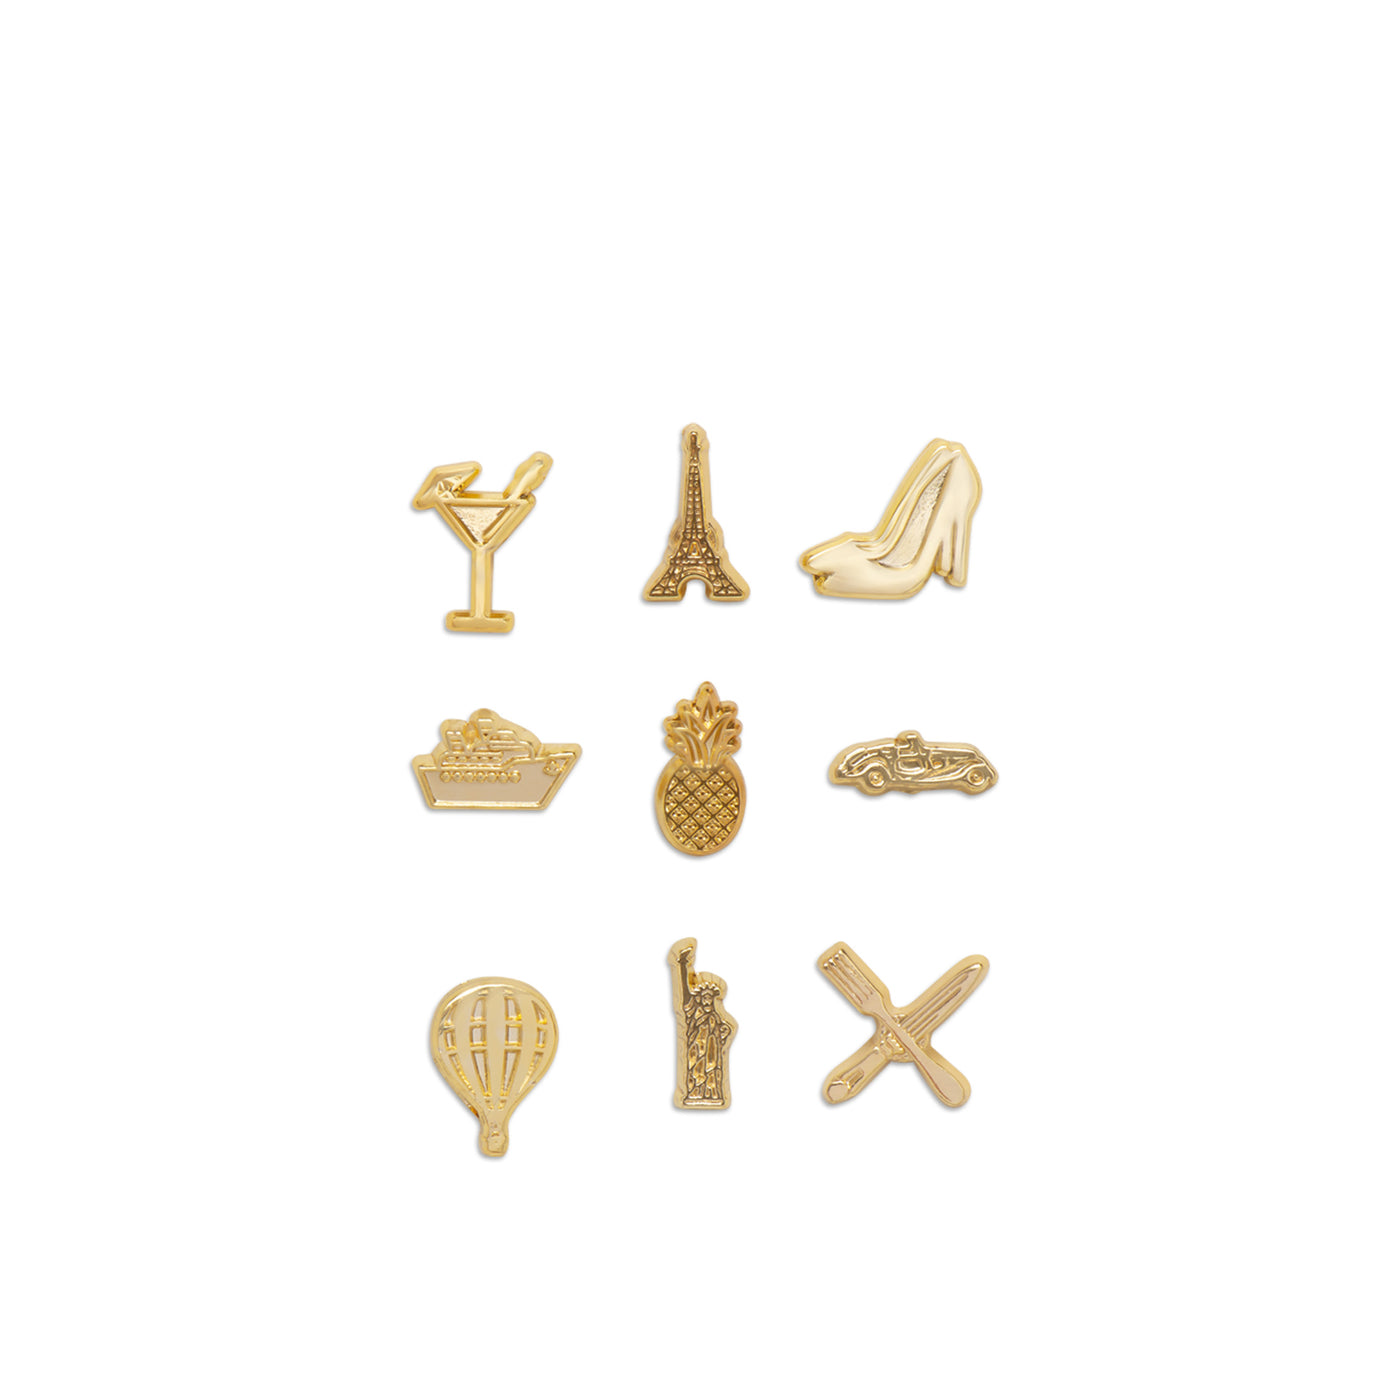 Lark and Ives / Lapel Pins / Pushboard Pins / Gold Pin / Gold Accessories / Set of 9 pins / Dreamboard Ideas / Dreamboard Pins 